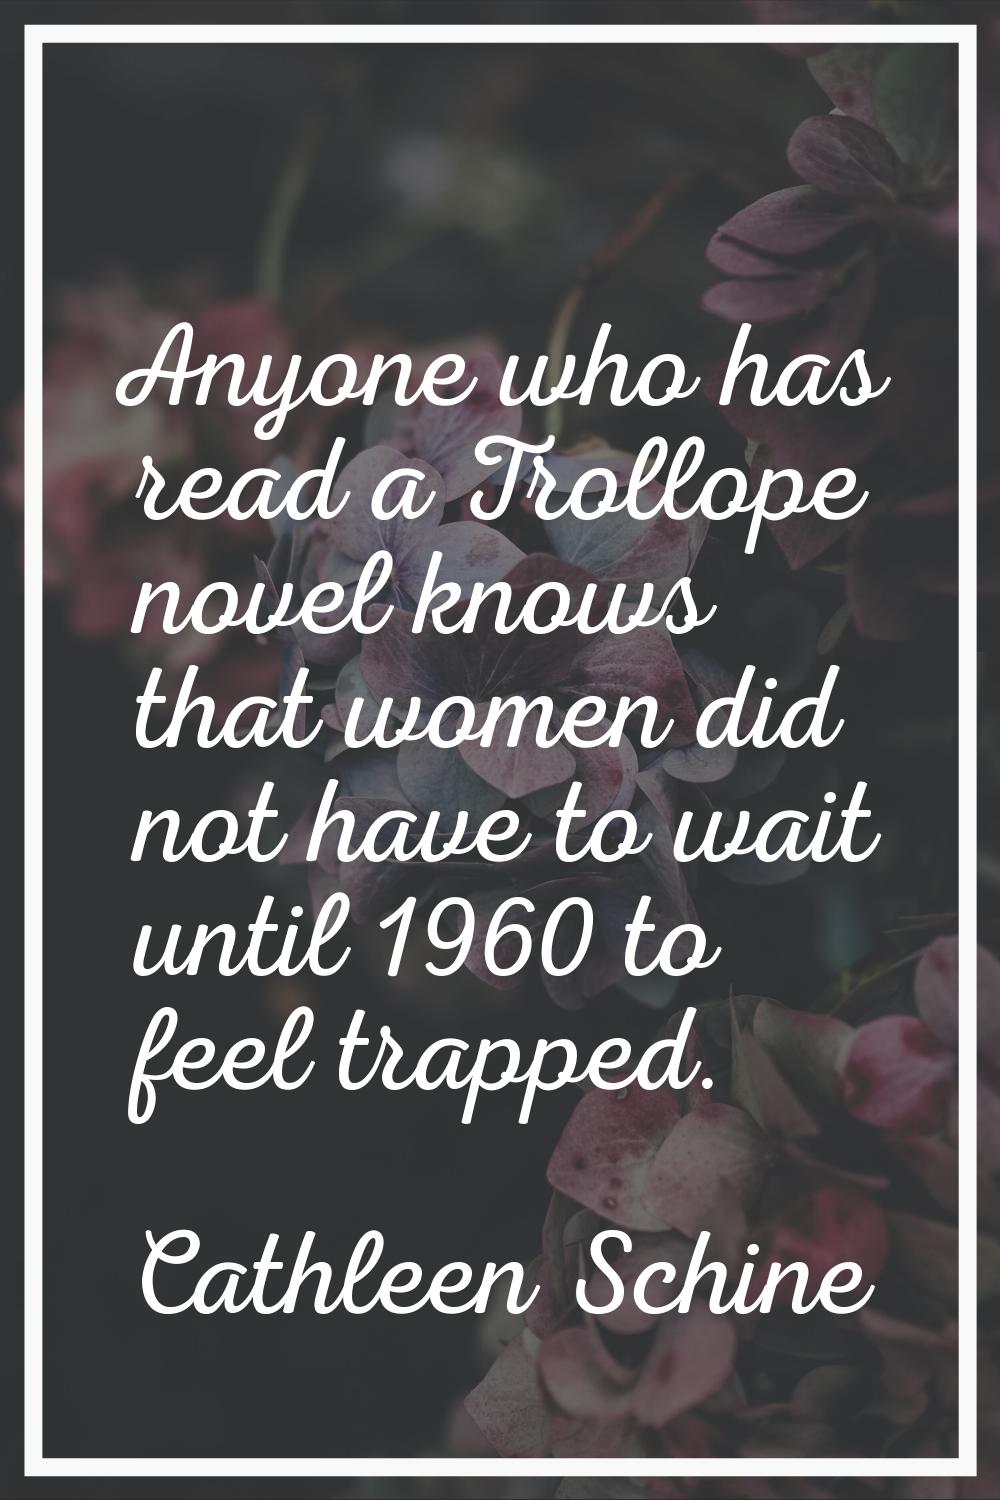 Anyone who has read a Trollope novel knows that women did not have to wait until 1960 to feel trapp